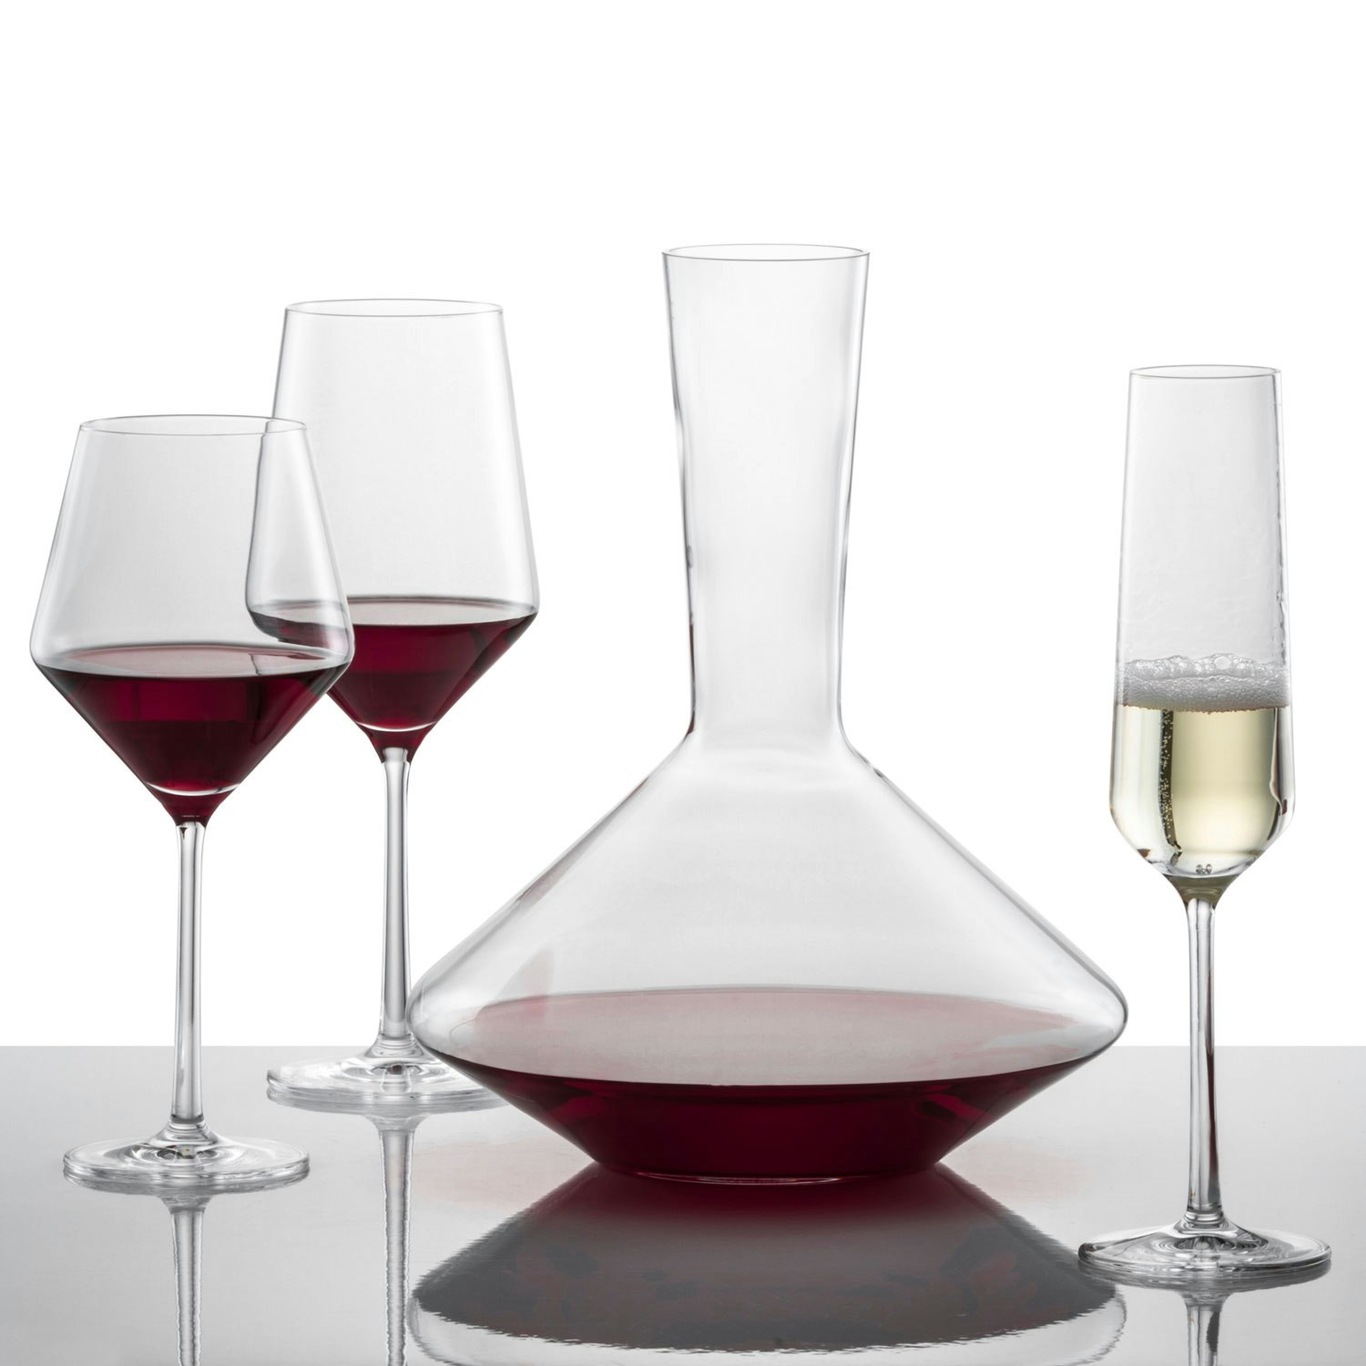 https://royaldesign.com/image/2/zwiesel-pure-burgundy-red-wine-glass-69-cl-2-pack-2?w=800&quality=80